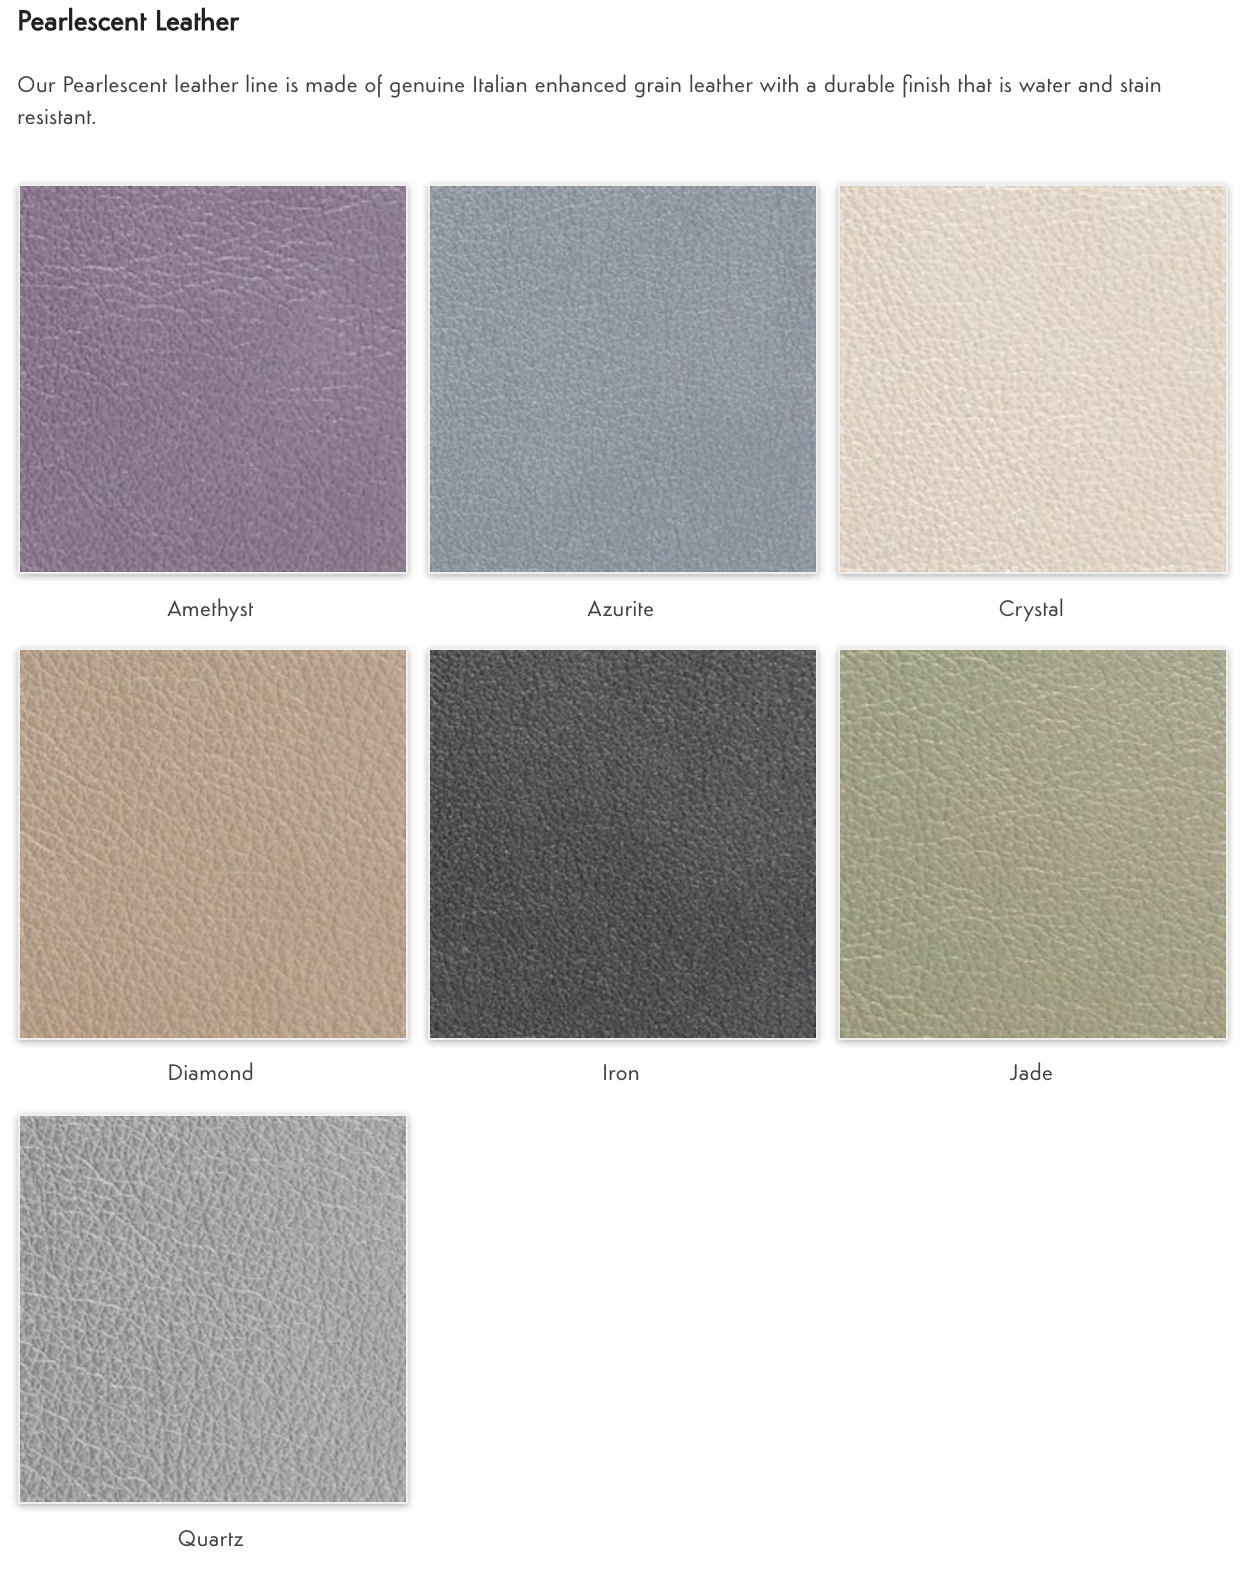 Pearlescent Leather.png